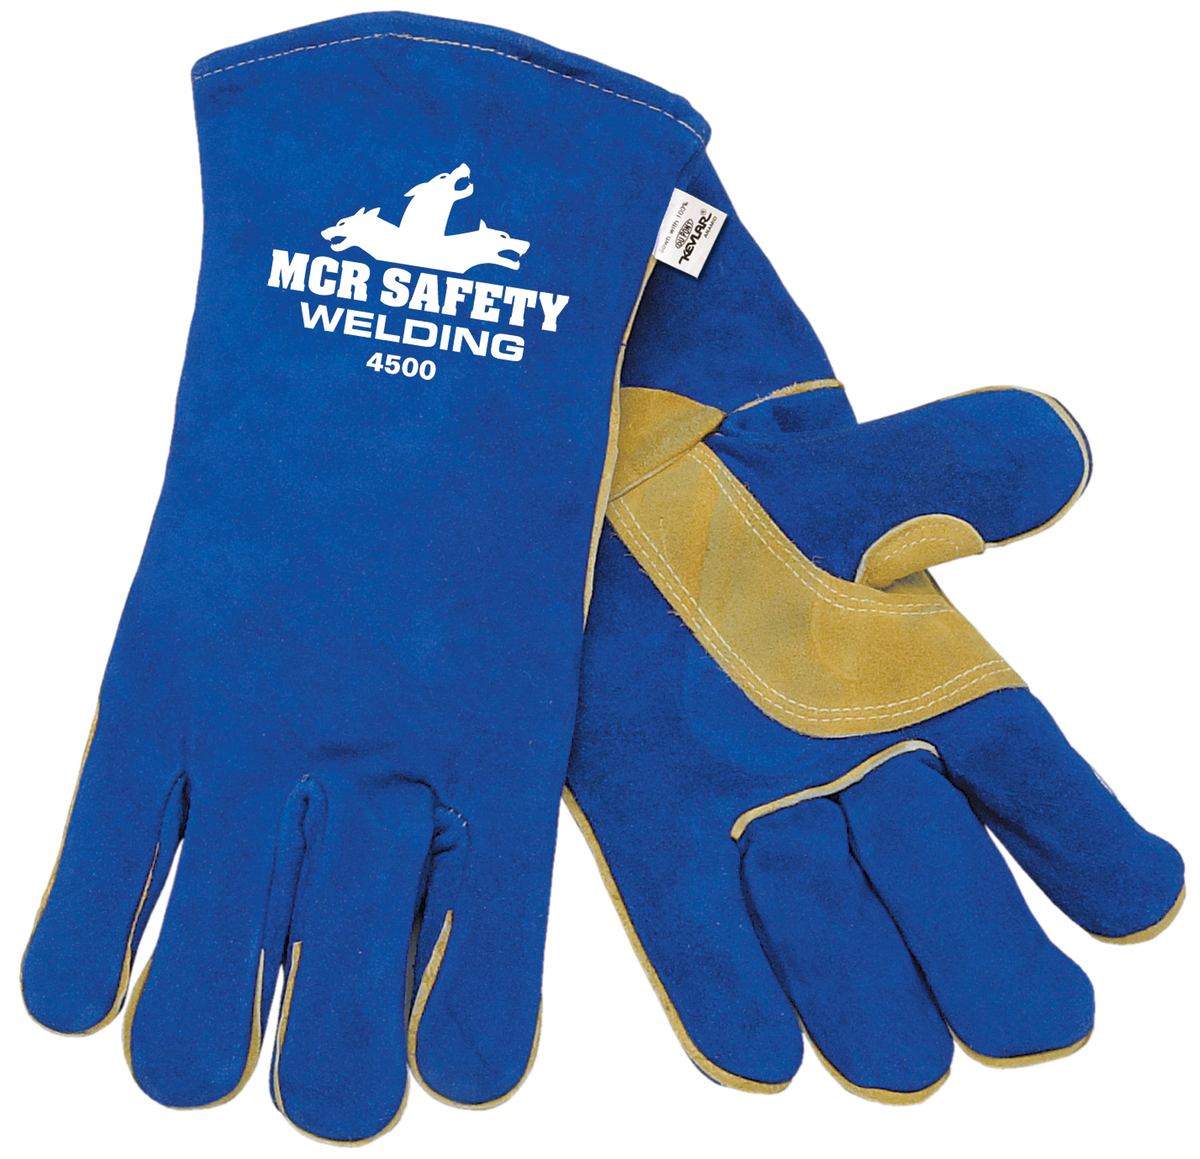 Foam Lined Select Shoulder Cow Skin Leather Welding Work Gloves with Reinforced Wing Thumb - Spill Control